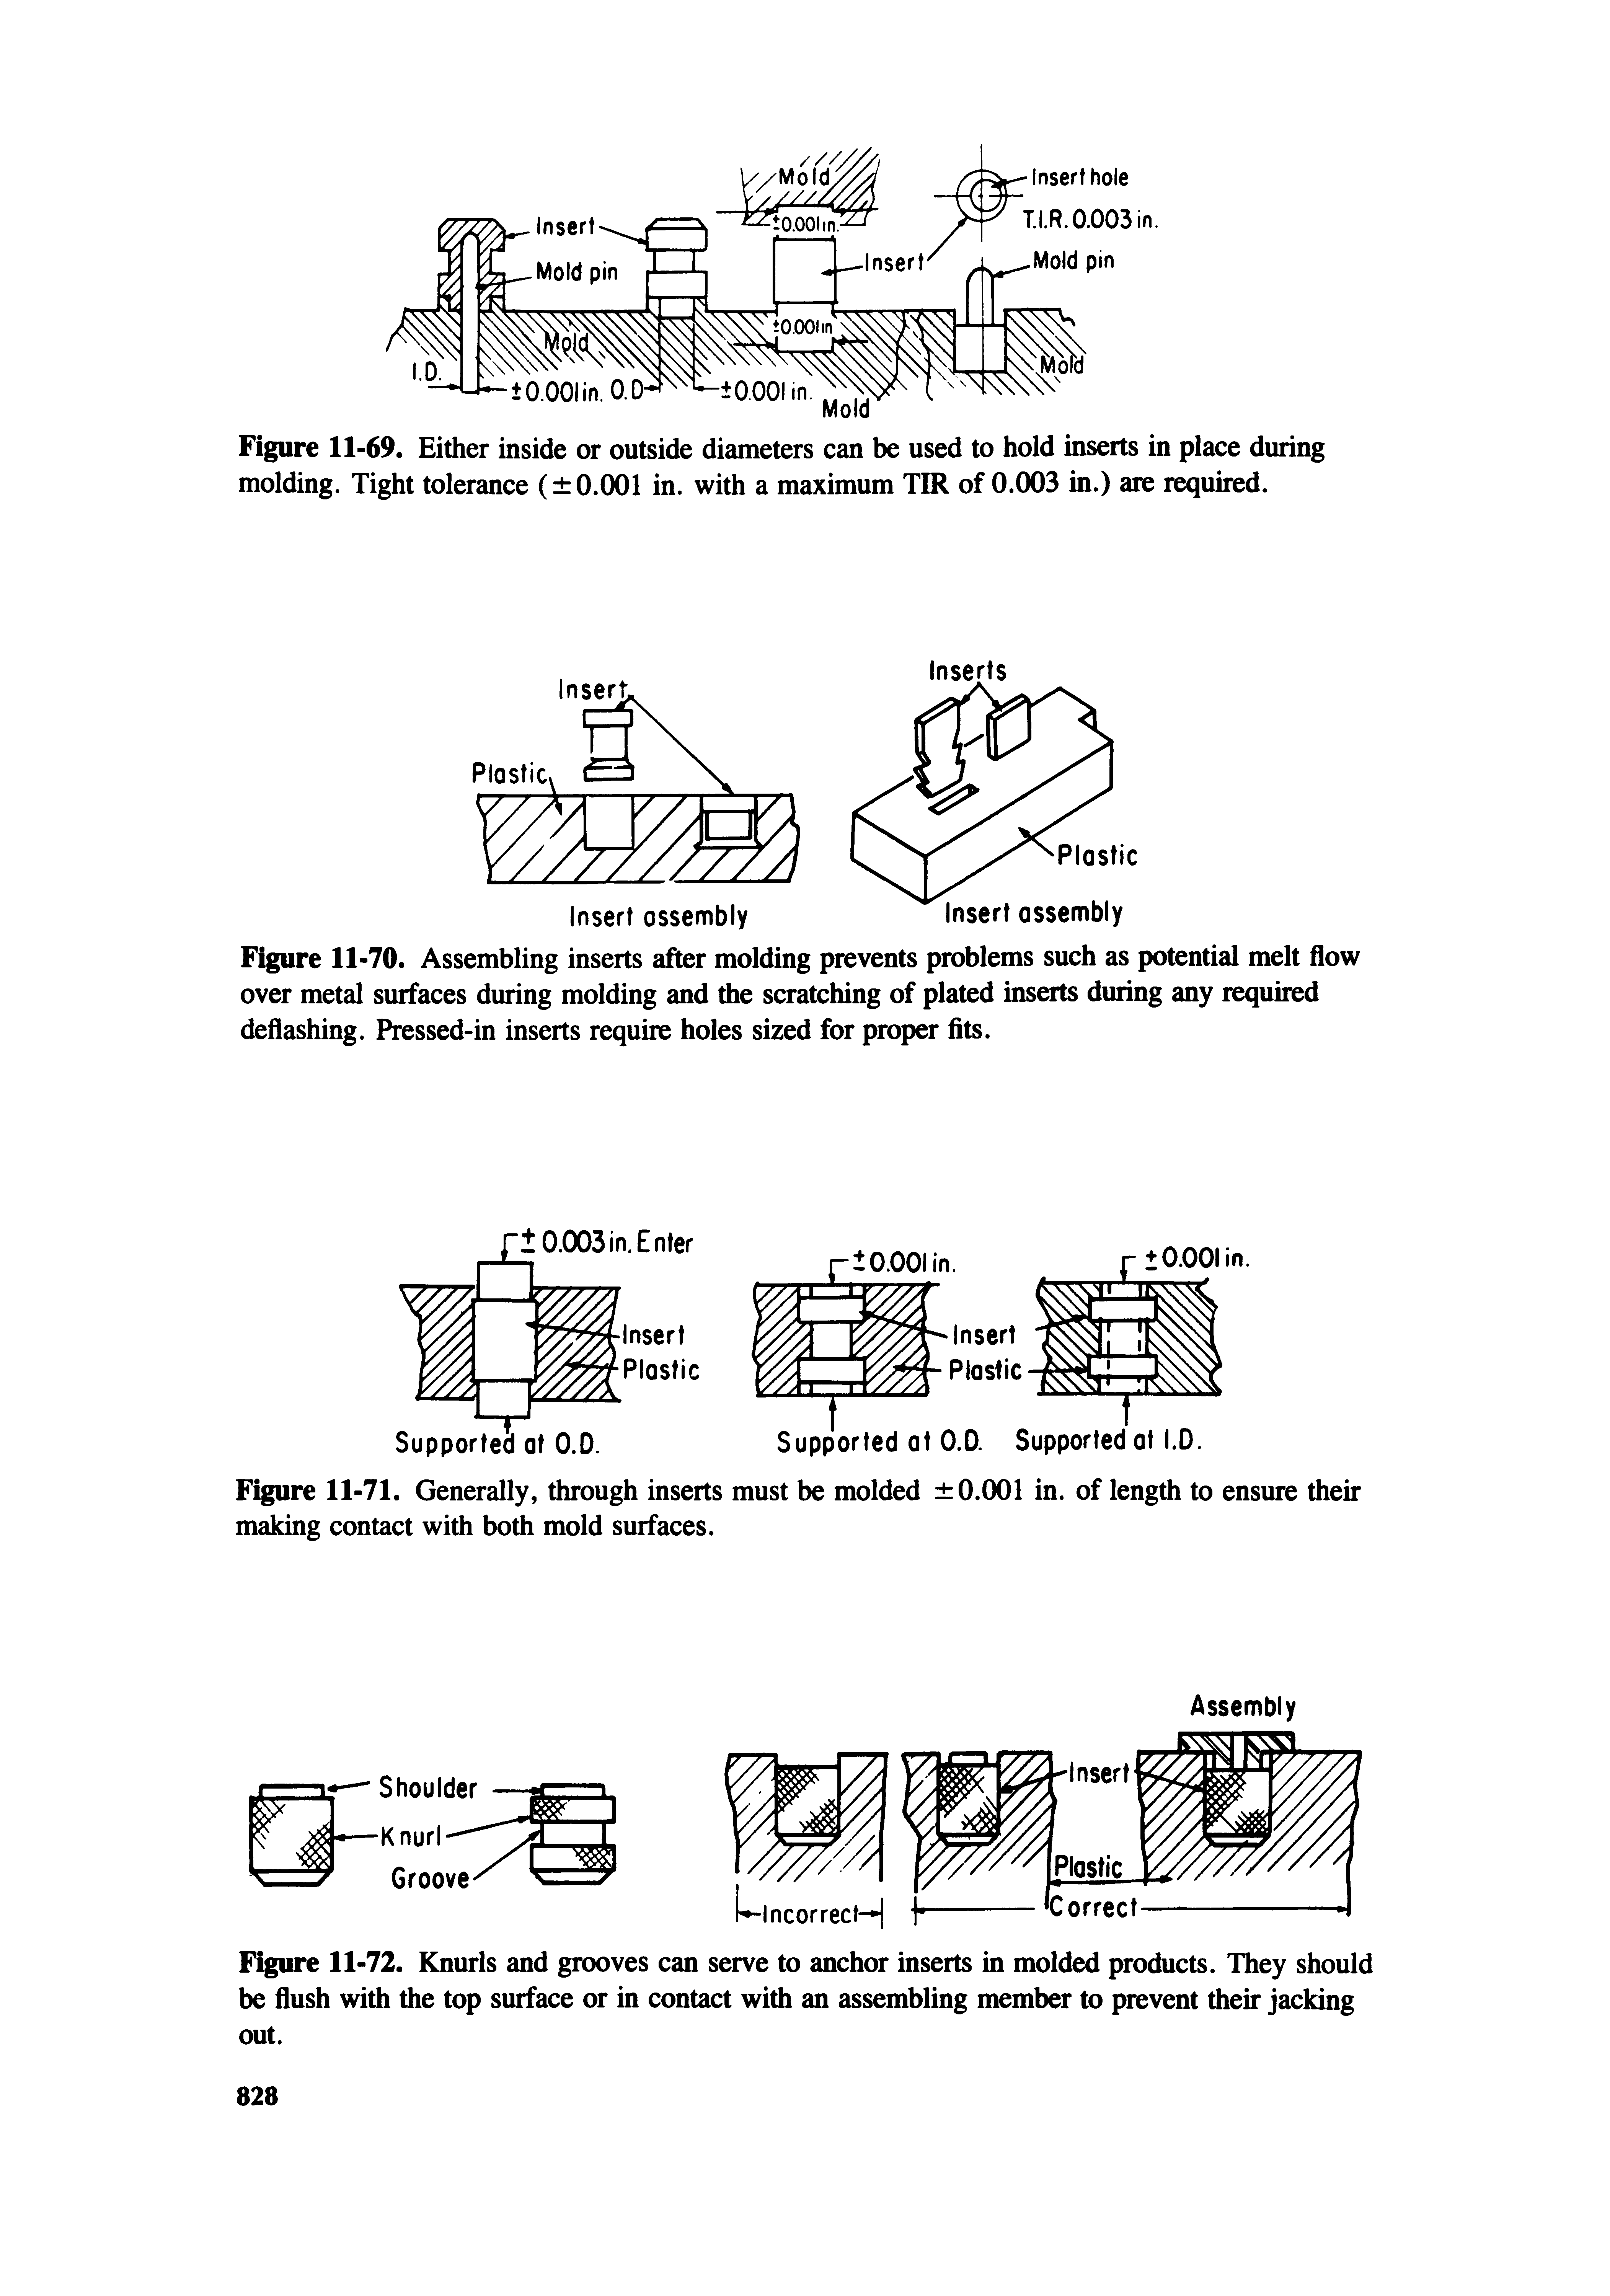 Figure 11-72. Knurls and grooves can serve to anchor inserts in molded products. They should be flush with the top surface or in contact with an assembling member to prevent their jacking out.